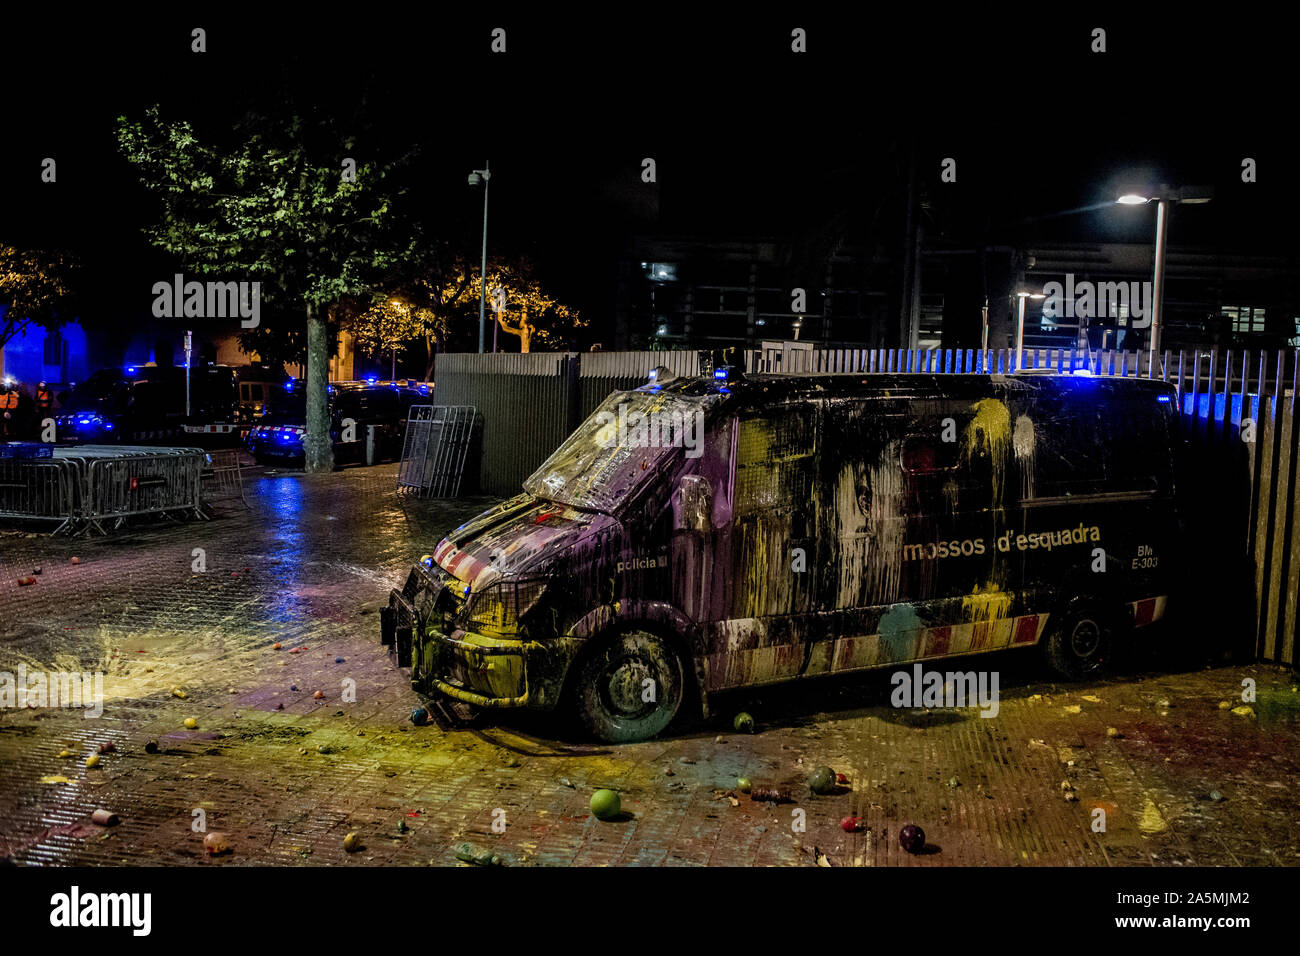 A Catalan regional police van appears covered in paint during a protest in Barcelona. Demonstrators gathered outside the Catalan interior ministry to denounce police brutality during last week protests. Protests took place throughout the Catalan territory after Spanish Supreme Court ruled to sentence nine Catalan politicians, involved in organizing the 2017 independence referendum, to 9-13 years in prison. Stock Photo